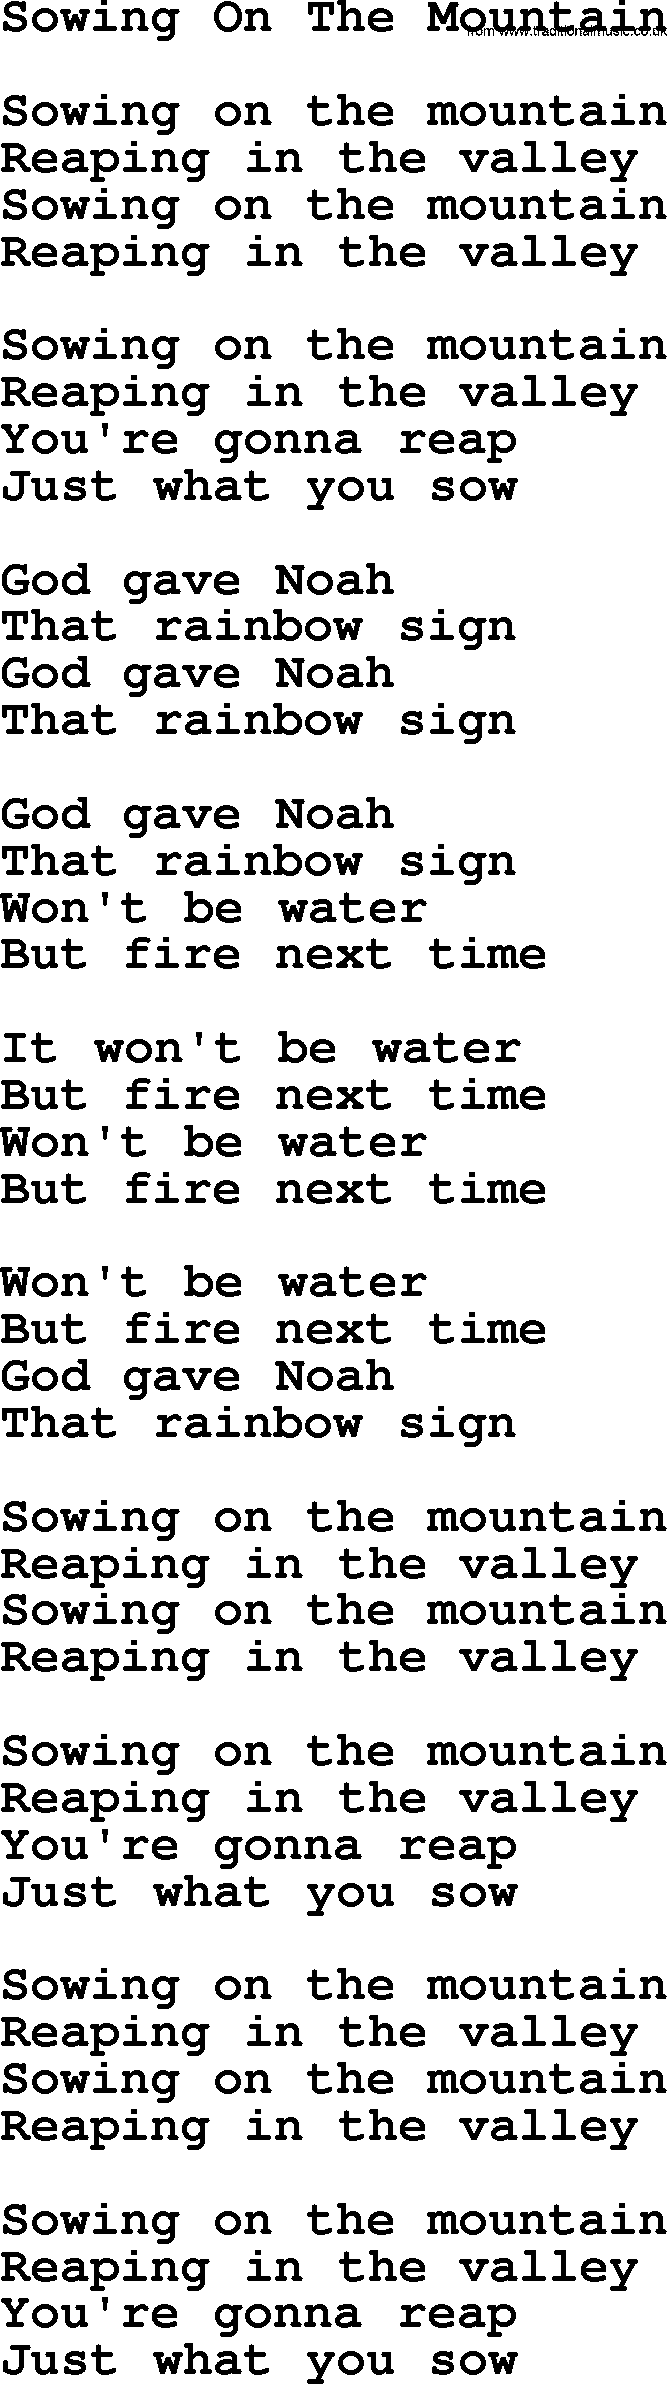 Woody Guthrie song Sowing On The Mountain lyrics